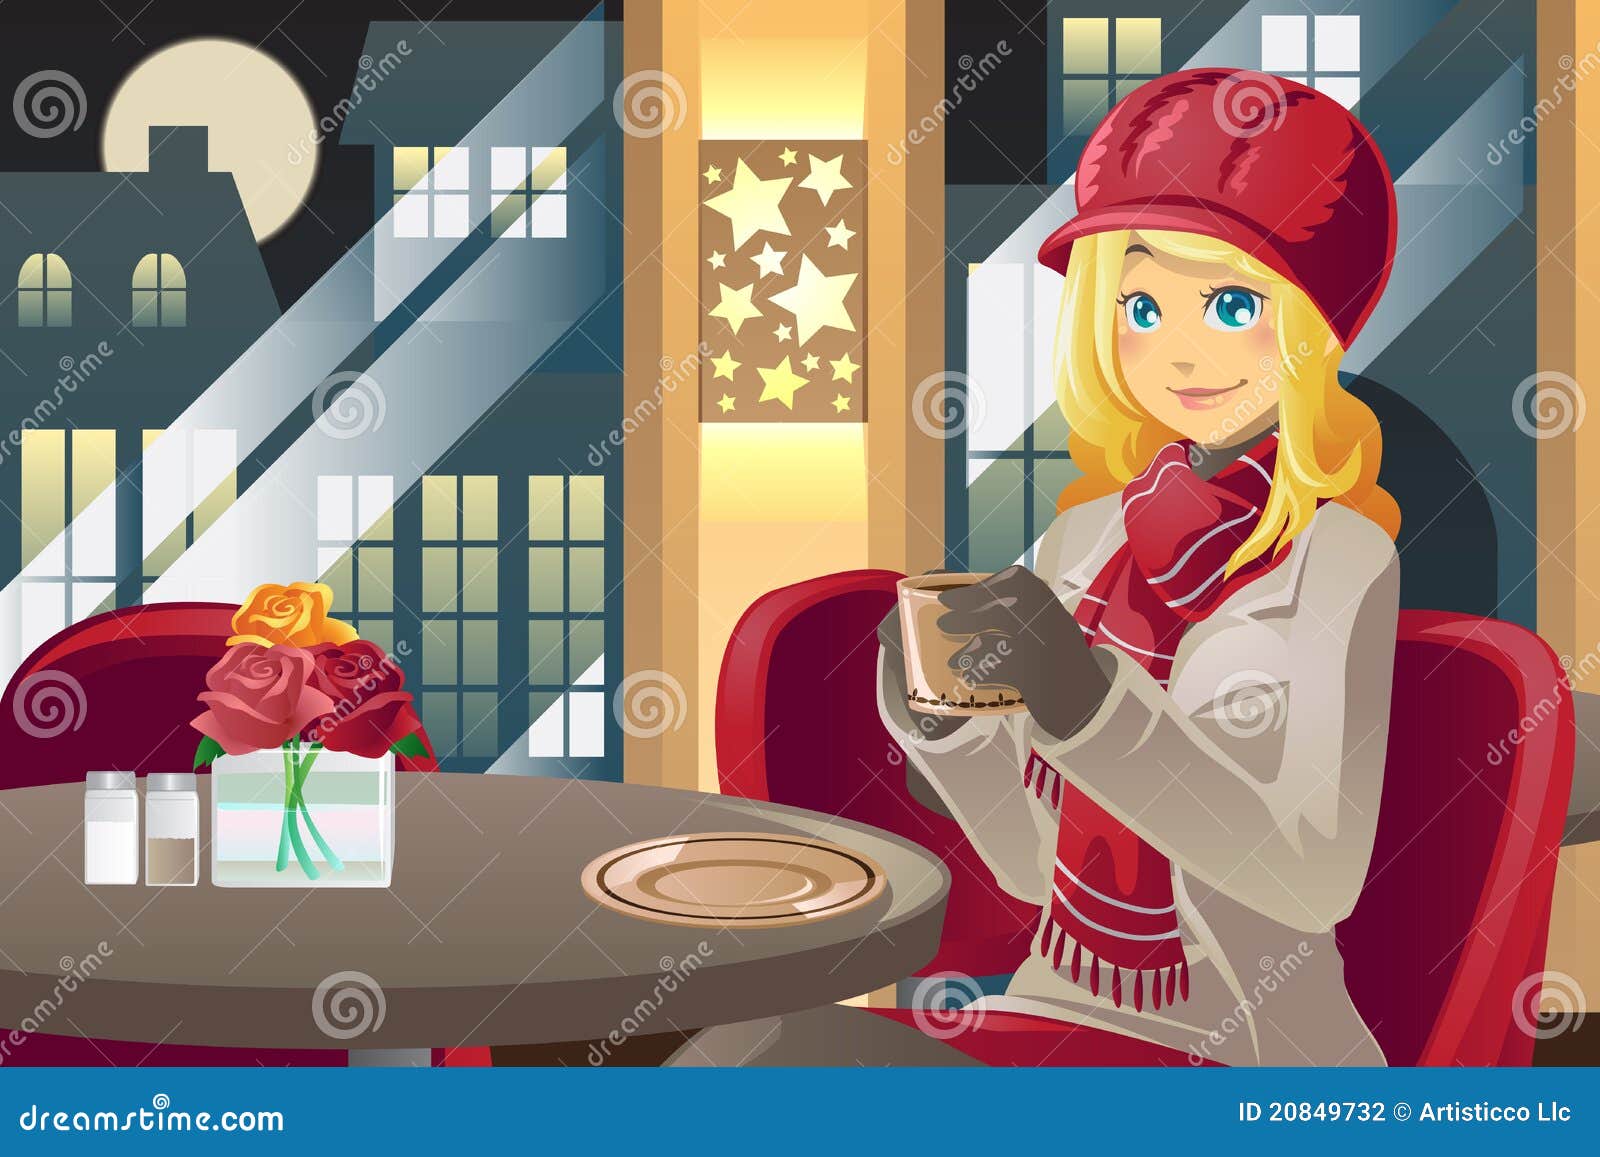 clipart of lady drinking coffee - photo #20